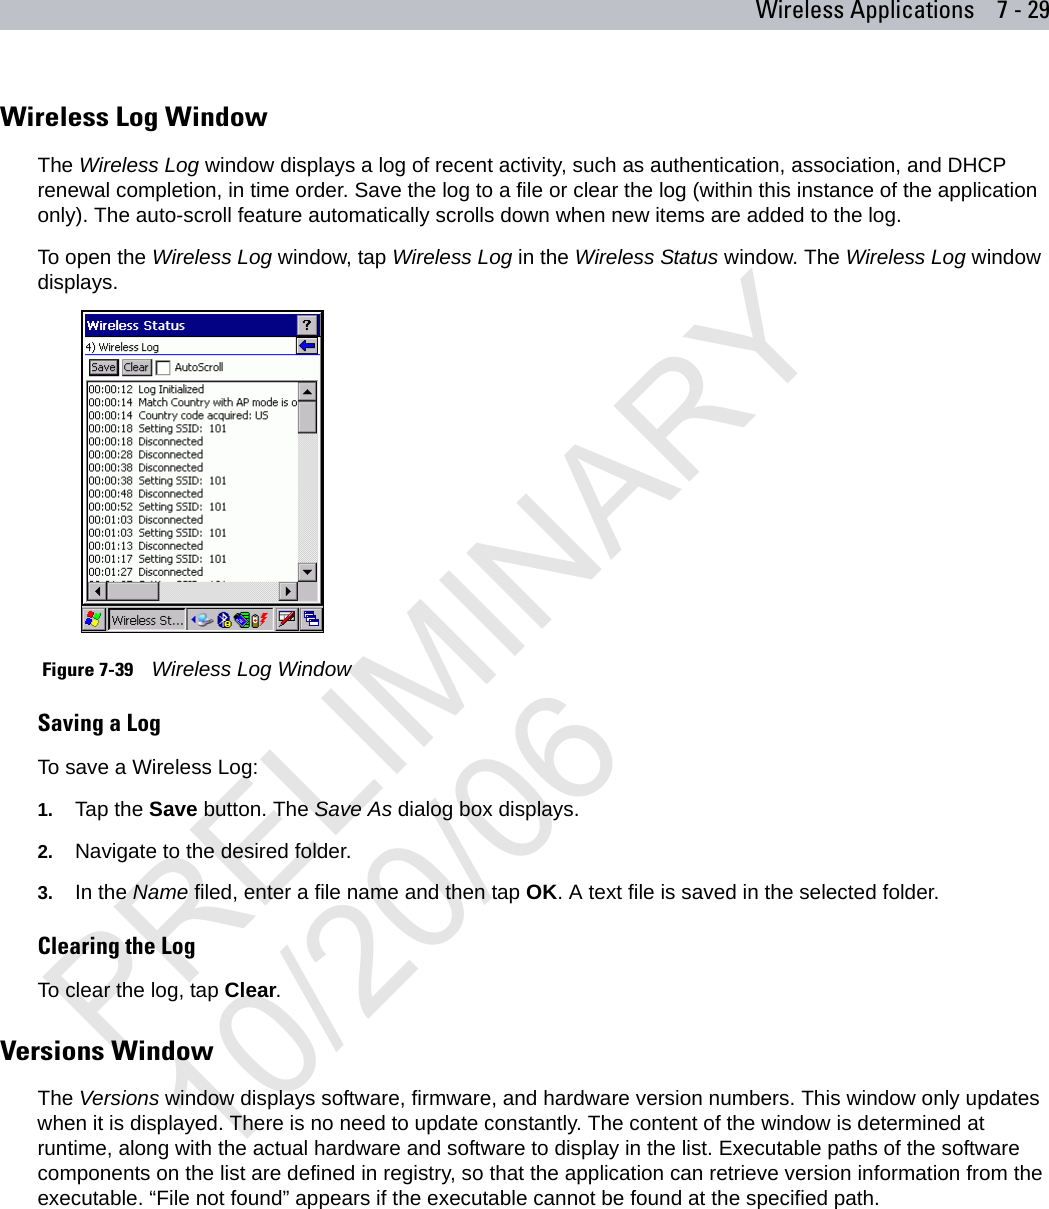 Wireless Applications 7 - 29Wireless Log WindowThe Wireless Log window displays a log of recent activity, such as authentication, association, and DHCP renewal completion, in time order. Save the log to a file or clear the log (within this instance of the application only). The auto-scroll feature automatically scrolls down when new items are added to the log.To open the Wireless Log window, tap Wireless Log in the Wireless Status window. The Wireless Log window displays.  Figure 7-39    Wireless Log WindowSaving a LogTo save a Wireless Log:1. Tap the Save button. The Save As dialog box displays.2. Navigate to the desired folder.3. In the Name filed, enter a file name and then tap OK. A text file is saved in the selected folder.Clearing the LogTo clear the log, tap Clear.Versions WindowThe Versions window displays software, firmware, and hardware version numbers. This window only updates when it is displayed. There is no need to update constantly. The content of the window is determined at runtime, along with the actual hardware and software to display in the list. Executable paths of the software components on the list are defined in registry, so that the application can retrieve version information from the executable. “File not found” appears if the executable cannot be found at the specified path.PRELIMINARY10/20/06